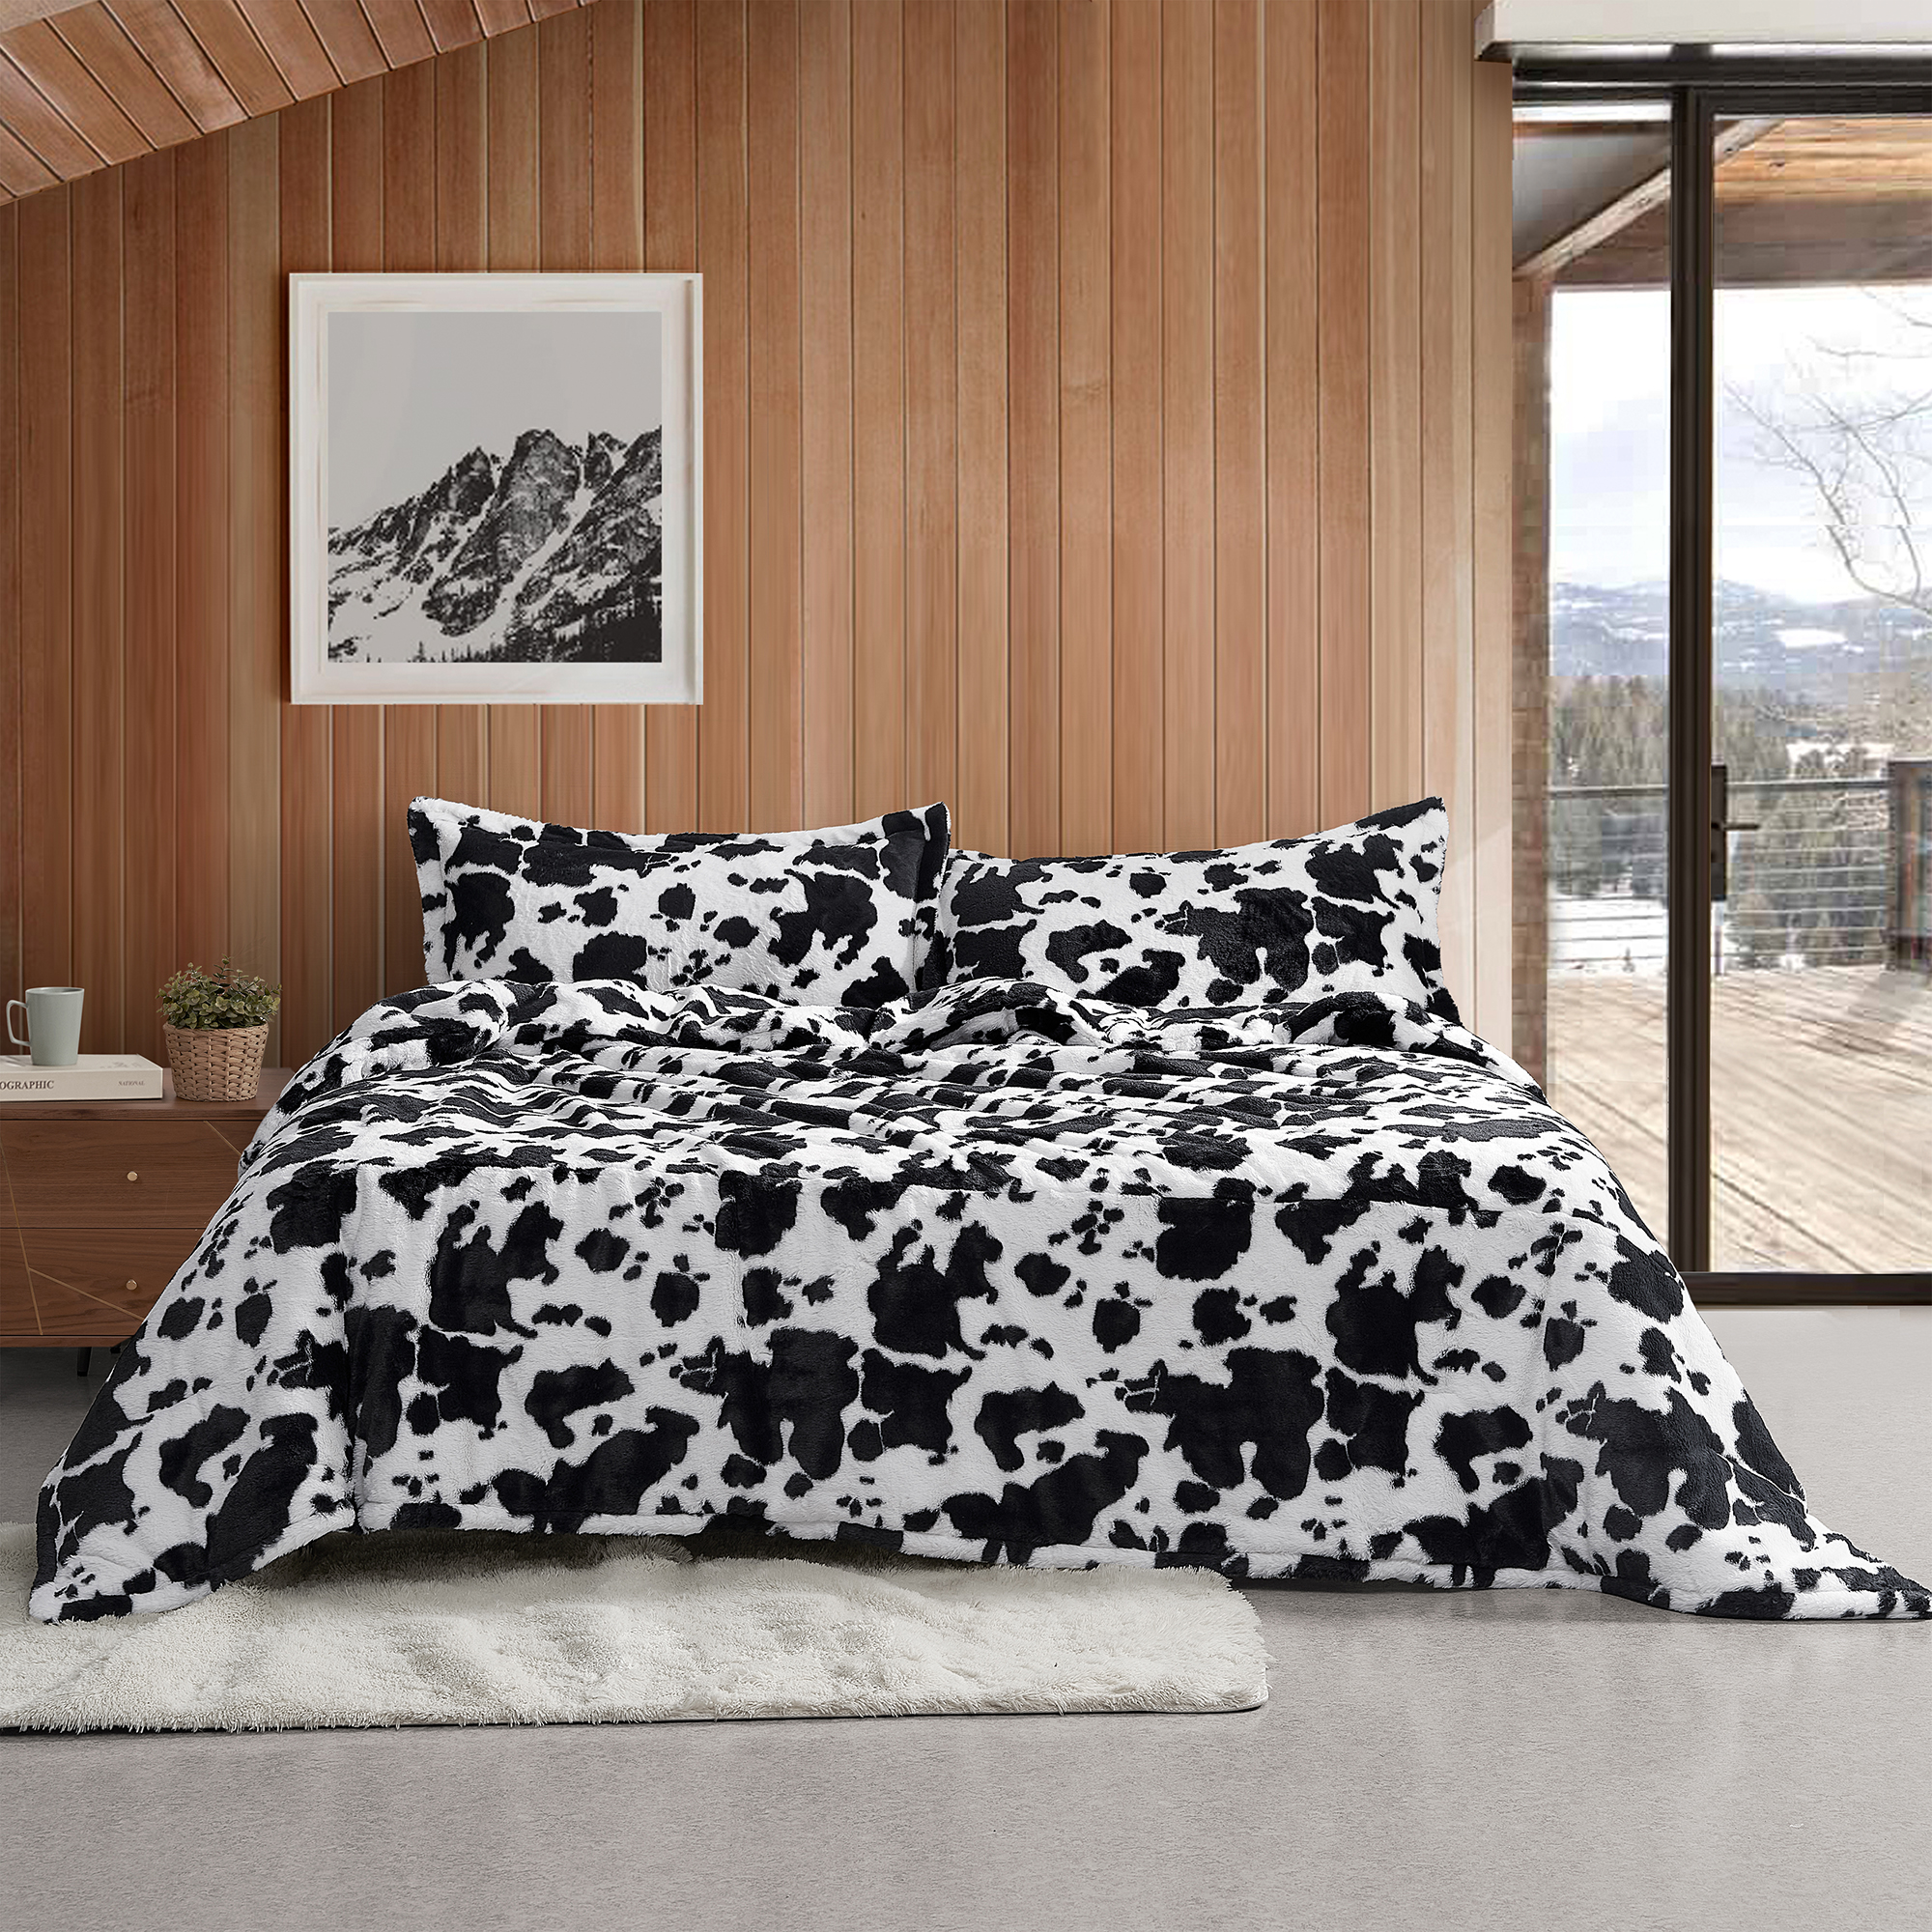 Milky Moo Cow - Coma Inducer Oversized King Comforter